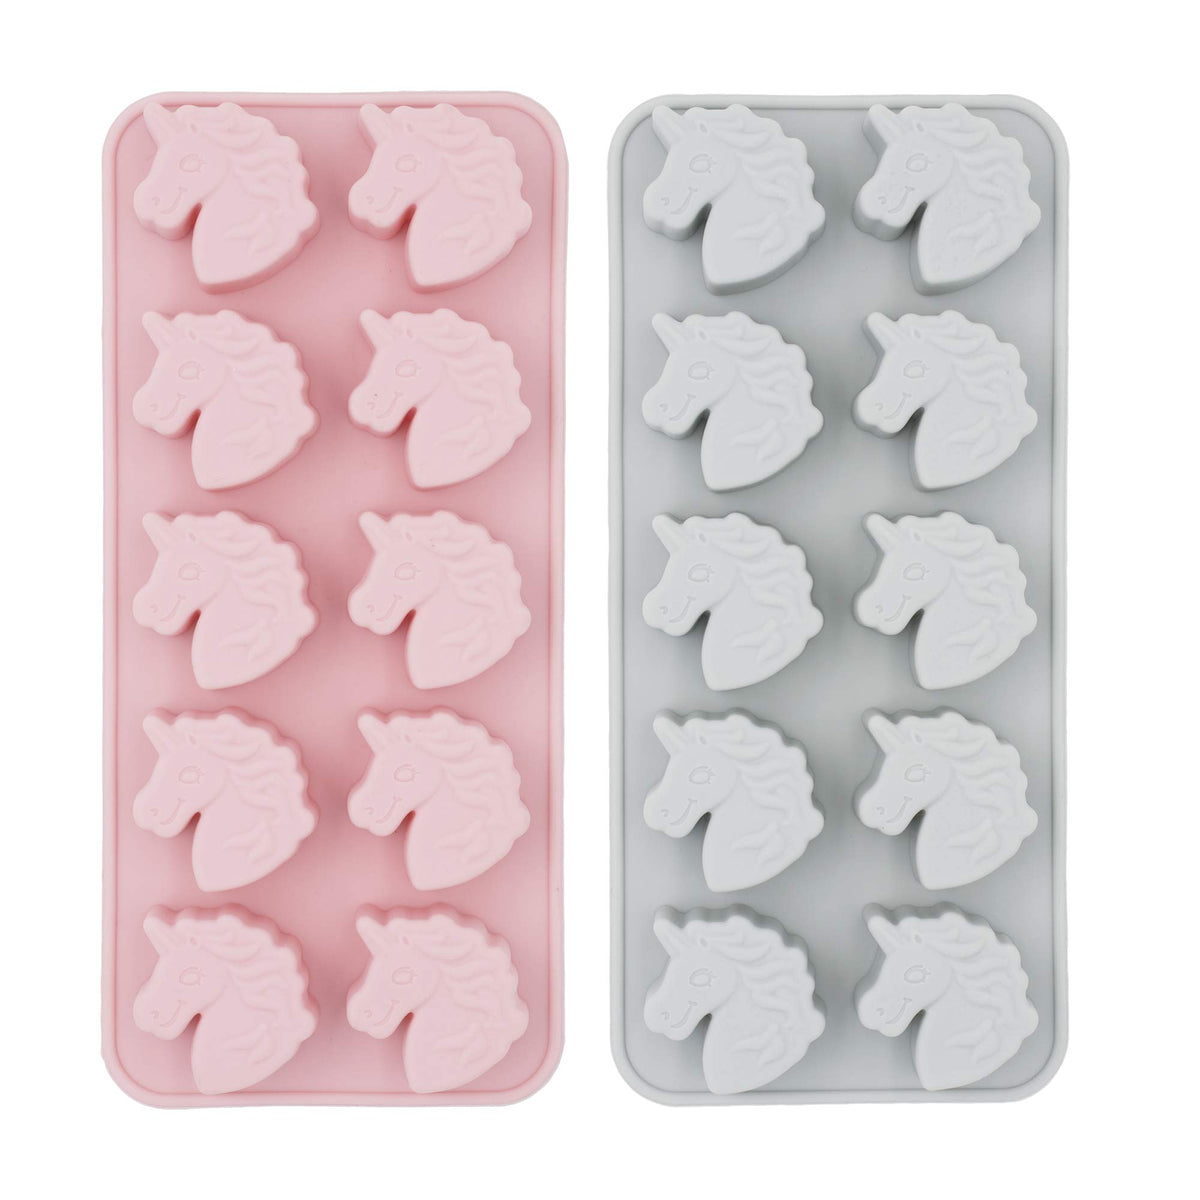 2-Pack Heart Silicone Molds - MoldFun Heart Craft Mold for Chocolate Soap Bath Bomb Lotion Bar Crayon Candy Gummy Cookie Muffin Cake Cupcake Baking